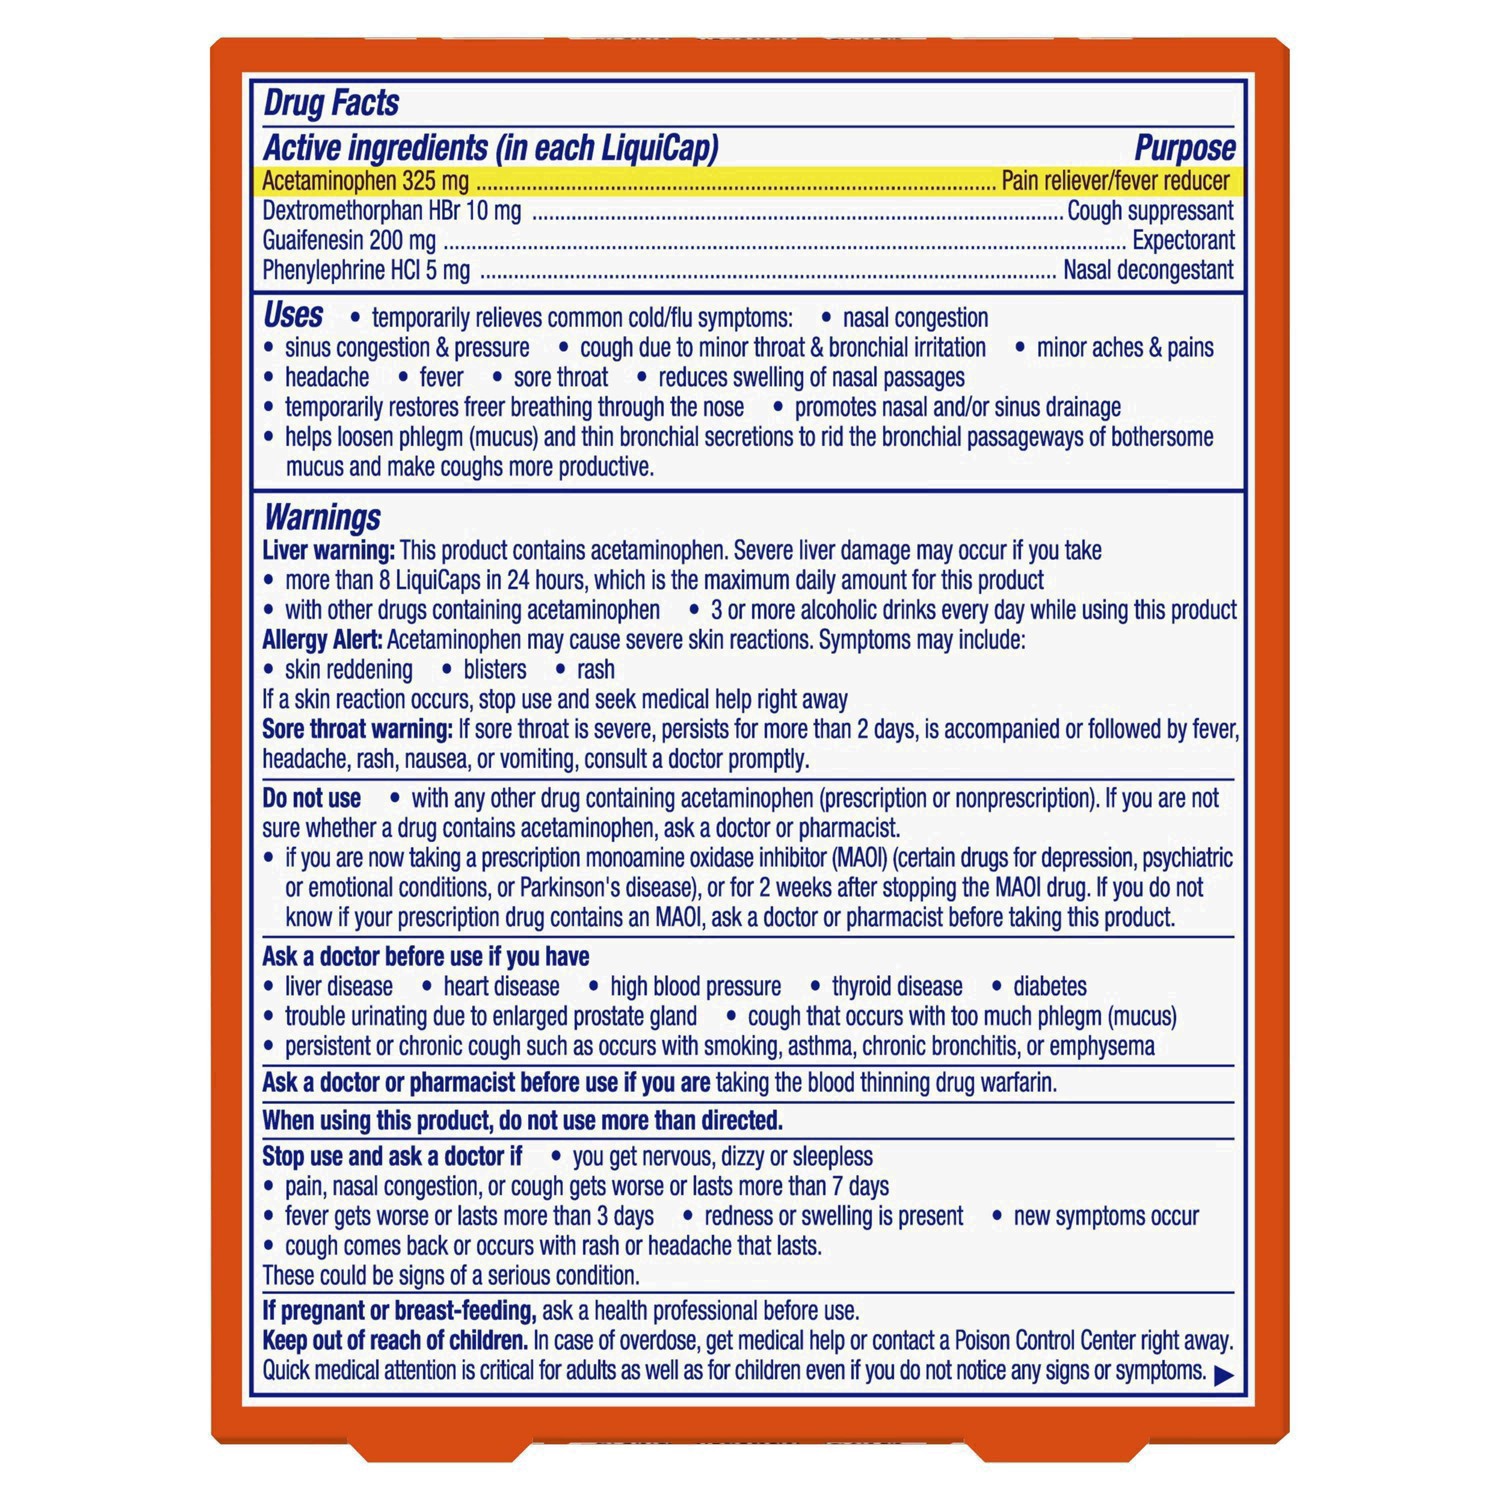 slide 22 of 46, Vicks DayQuil SEVERE Cold & Flu Medicine, Maximum Strength 9-Symptom Non-Drowsy Daytime Relief for Headache, Fever, Sore Throat, Minor Aches and Pains, Chest Congestion, Stuffy Nose, Nasal Congestion, Sinus Pressure, and Cough, 24 Liquicaps, 24 ct